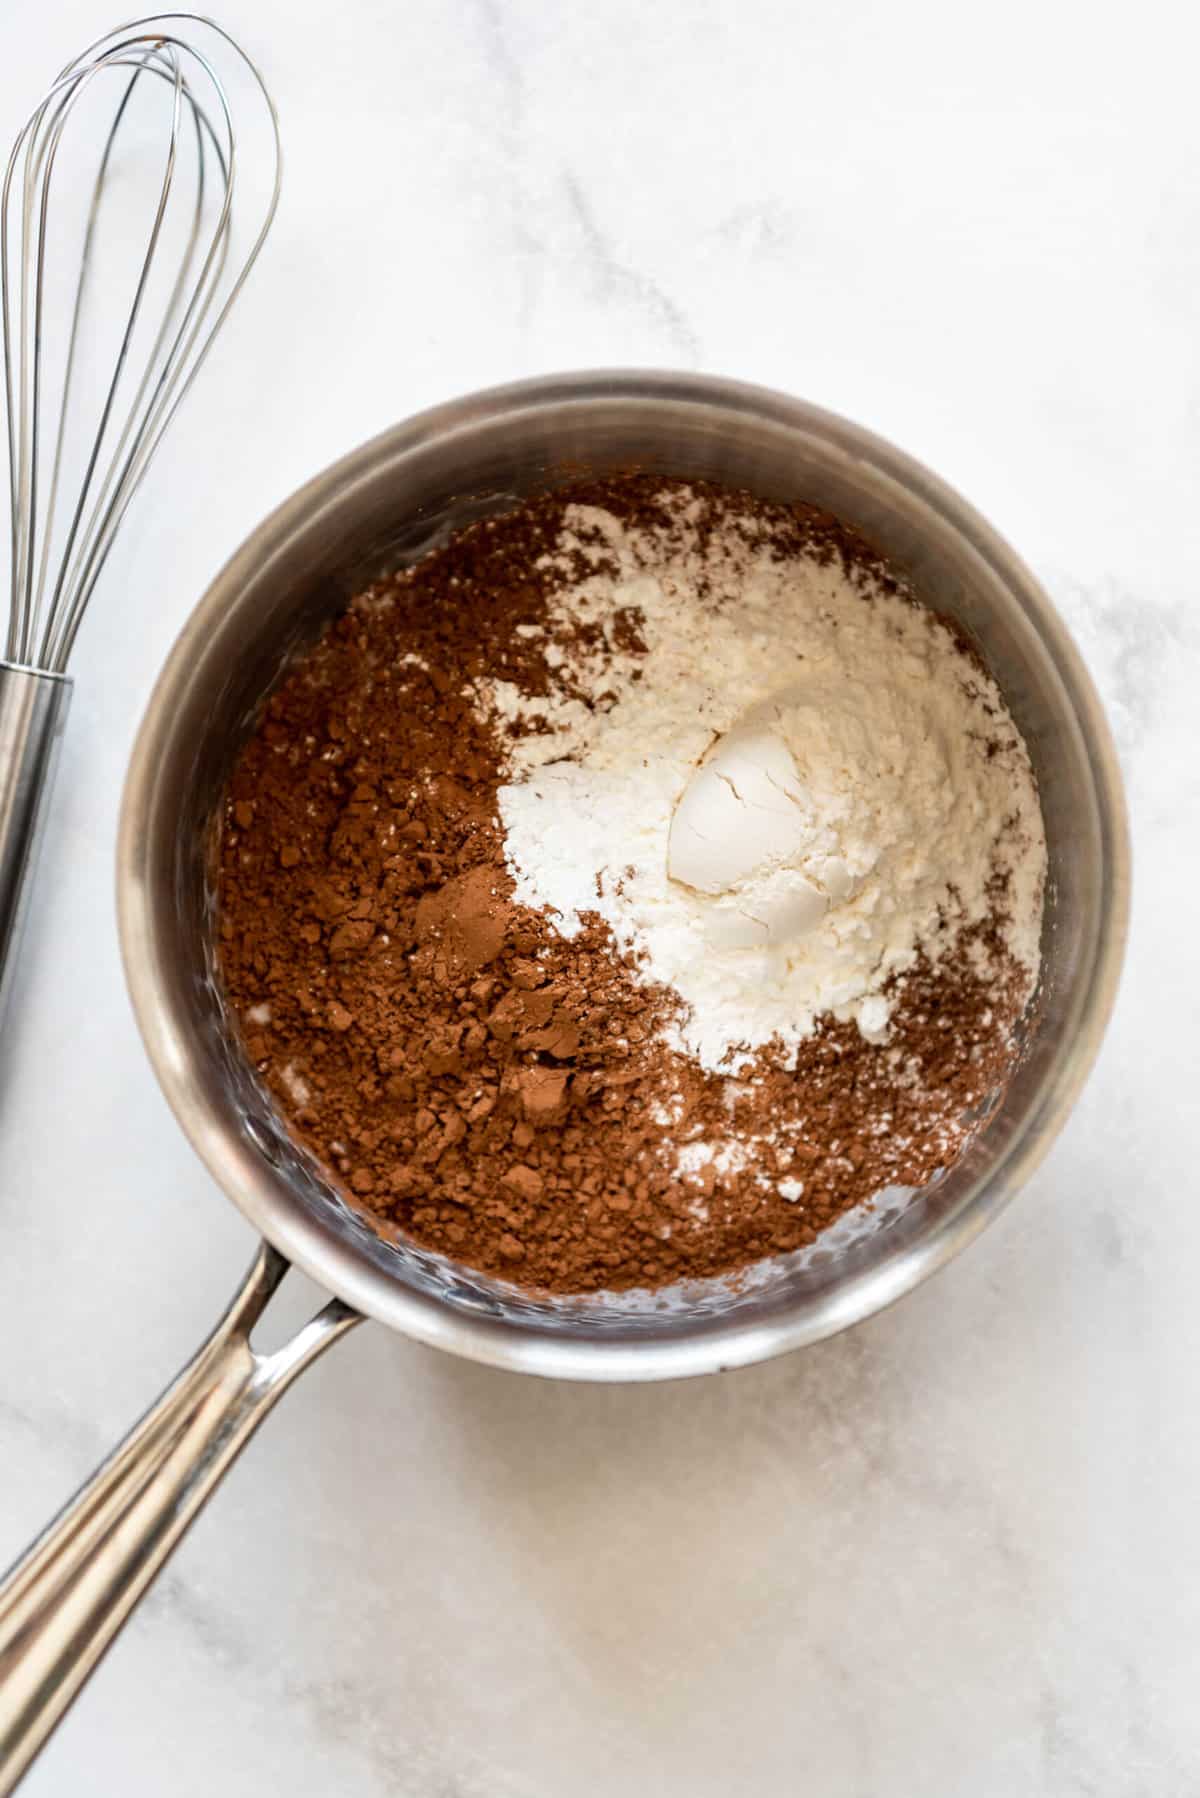 Combining chocolate pudding ingredients together in a medium saucepan.